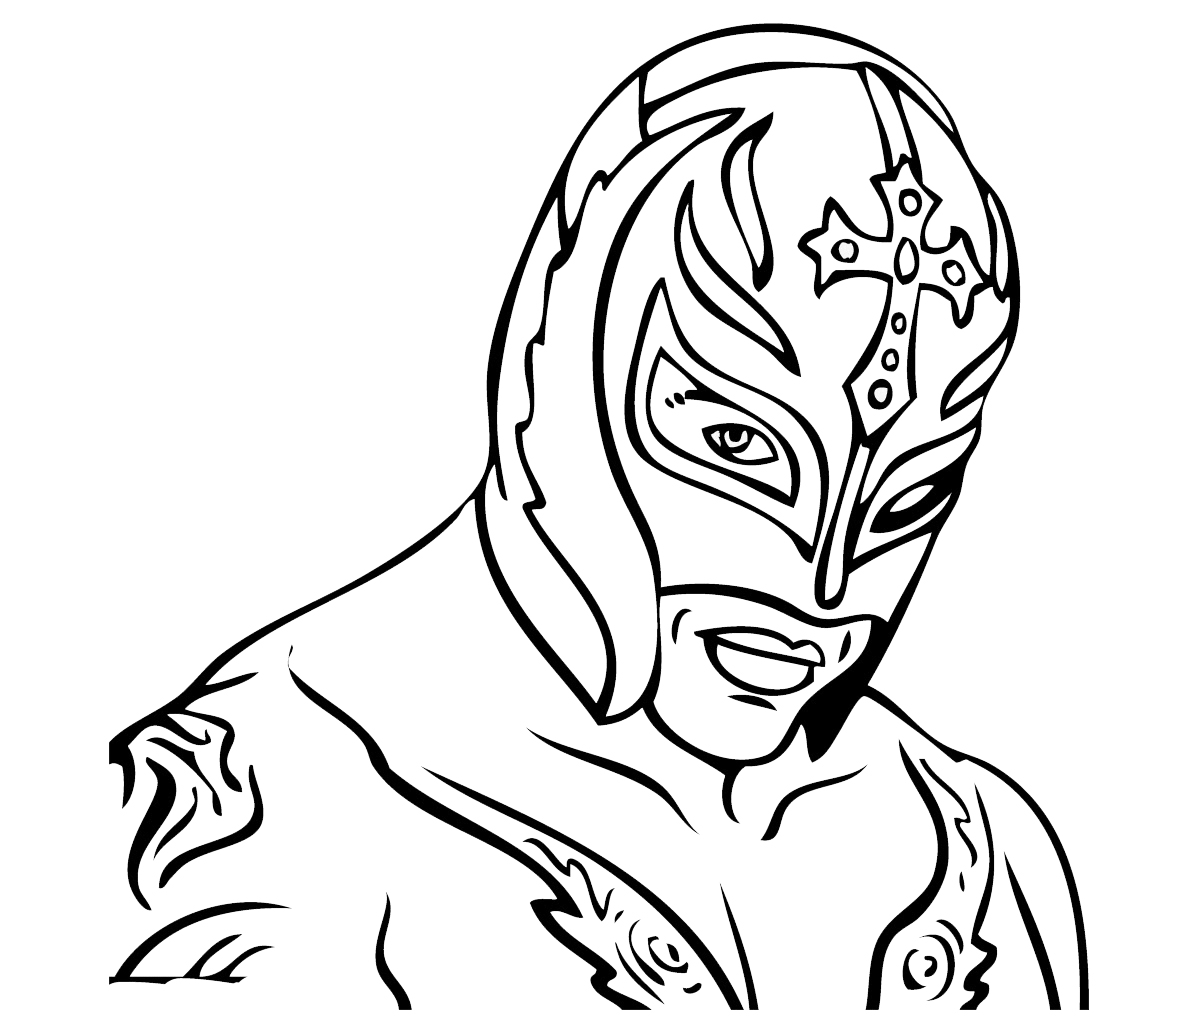 Rey Mysterio WWE Coloring Page